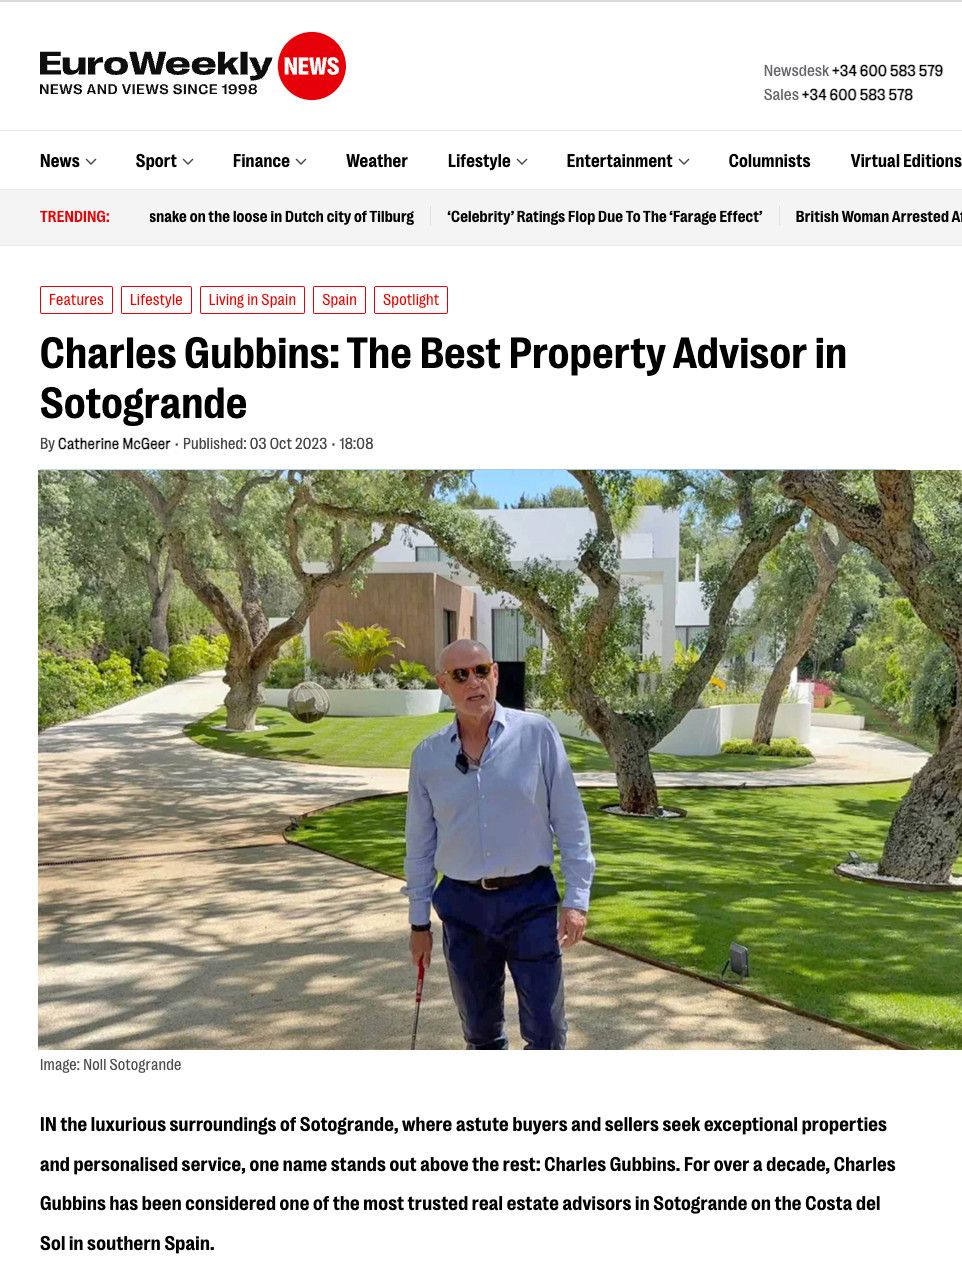 Euro Weekly News - Charles Gubbins the best real estate agent in Sotogrande near Marbella